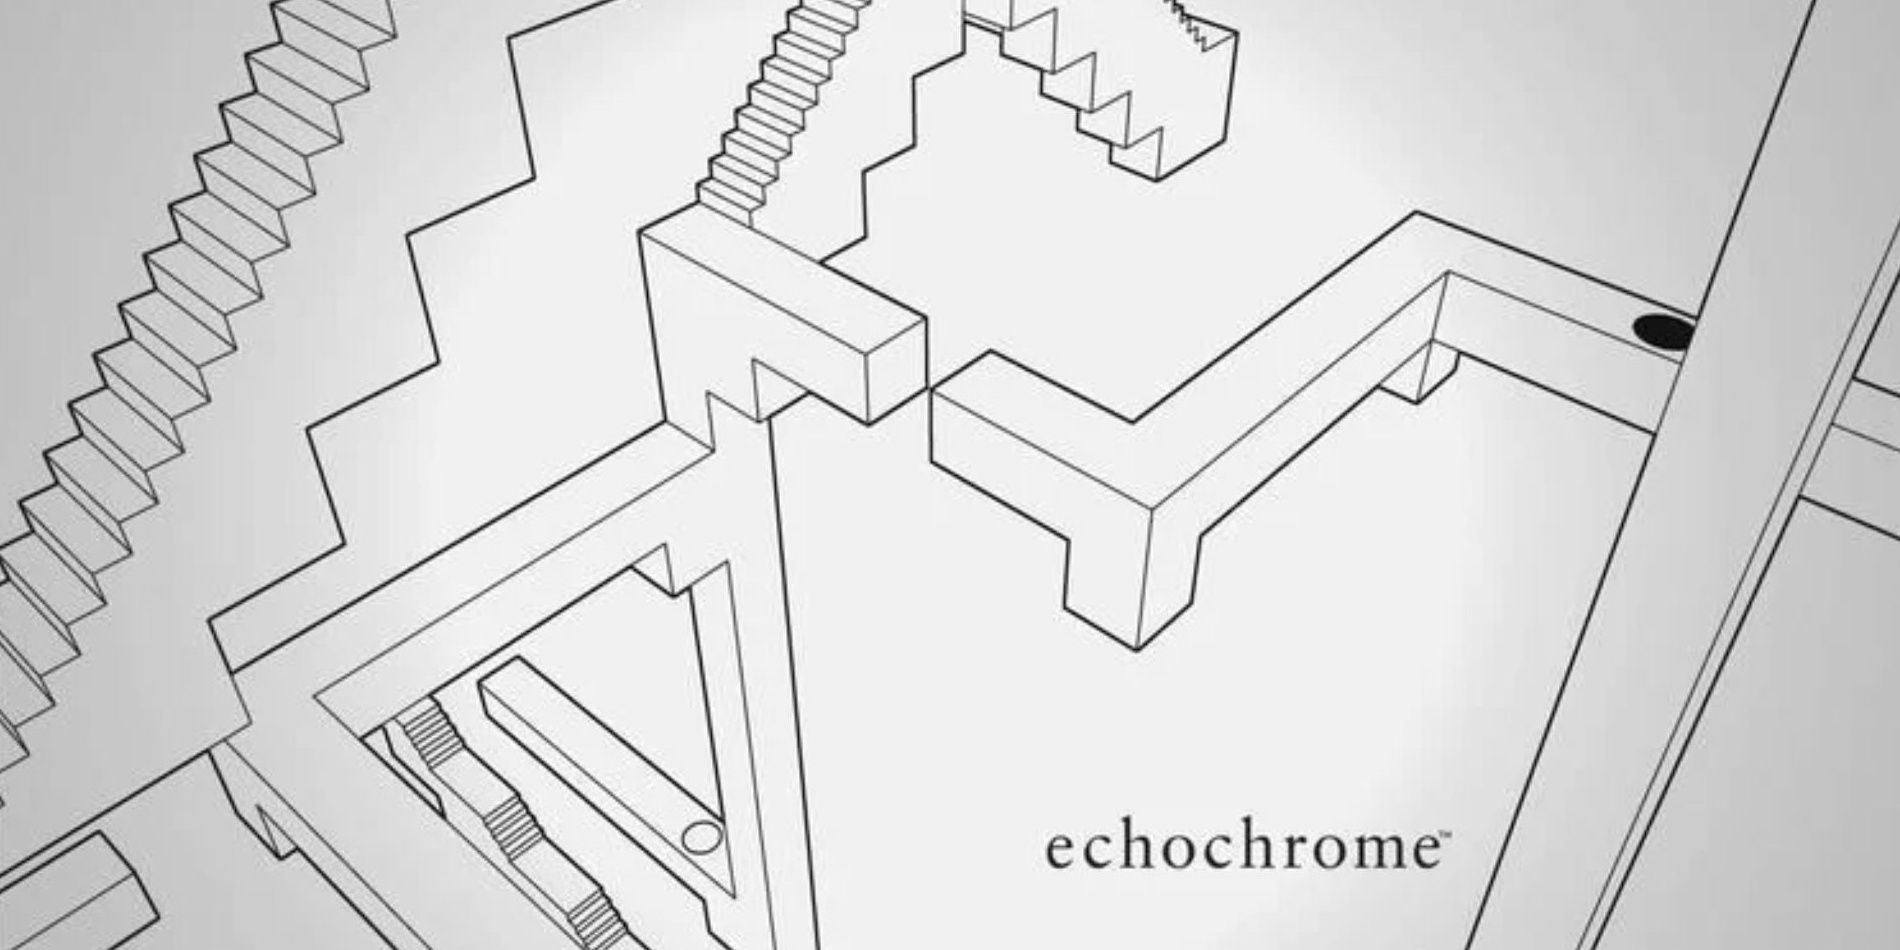 A level from Echochrome